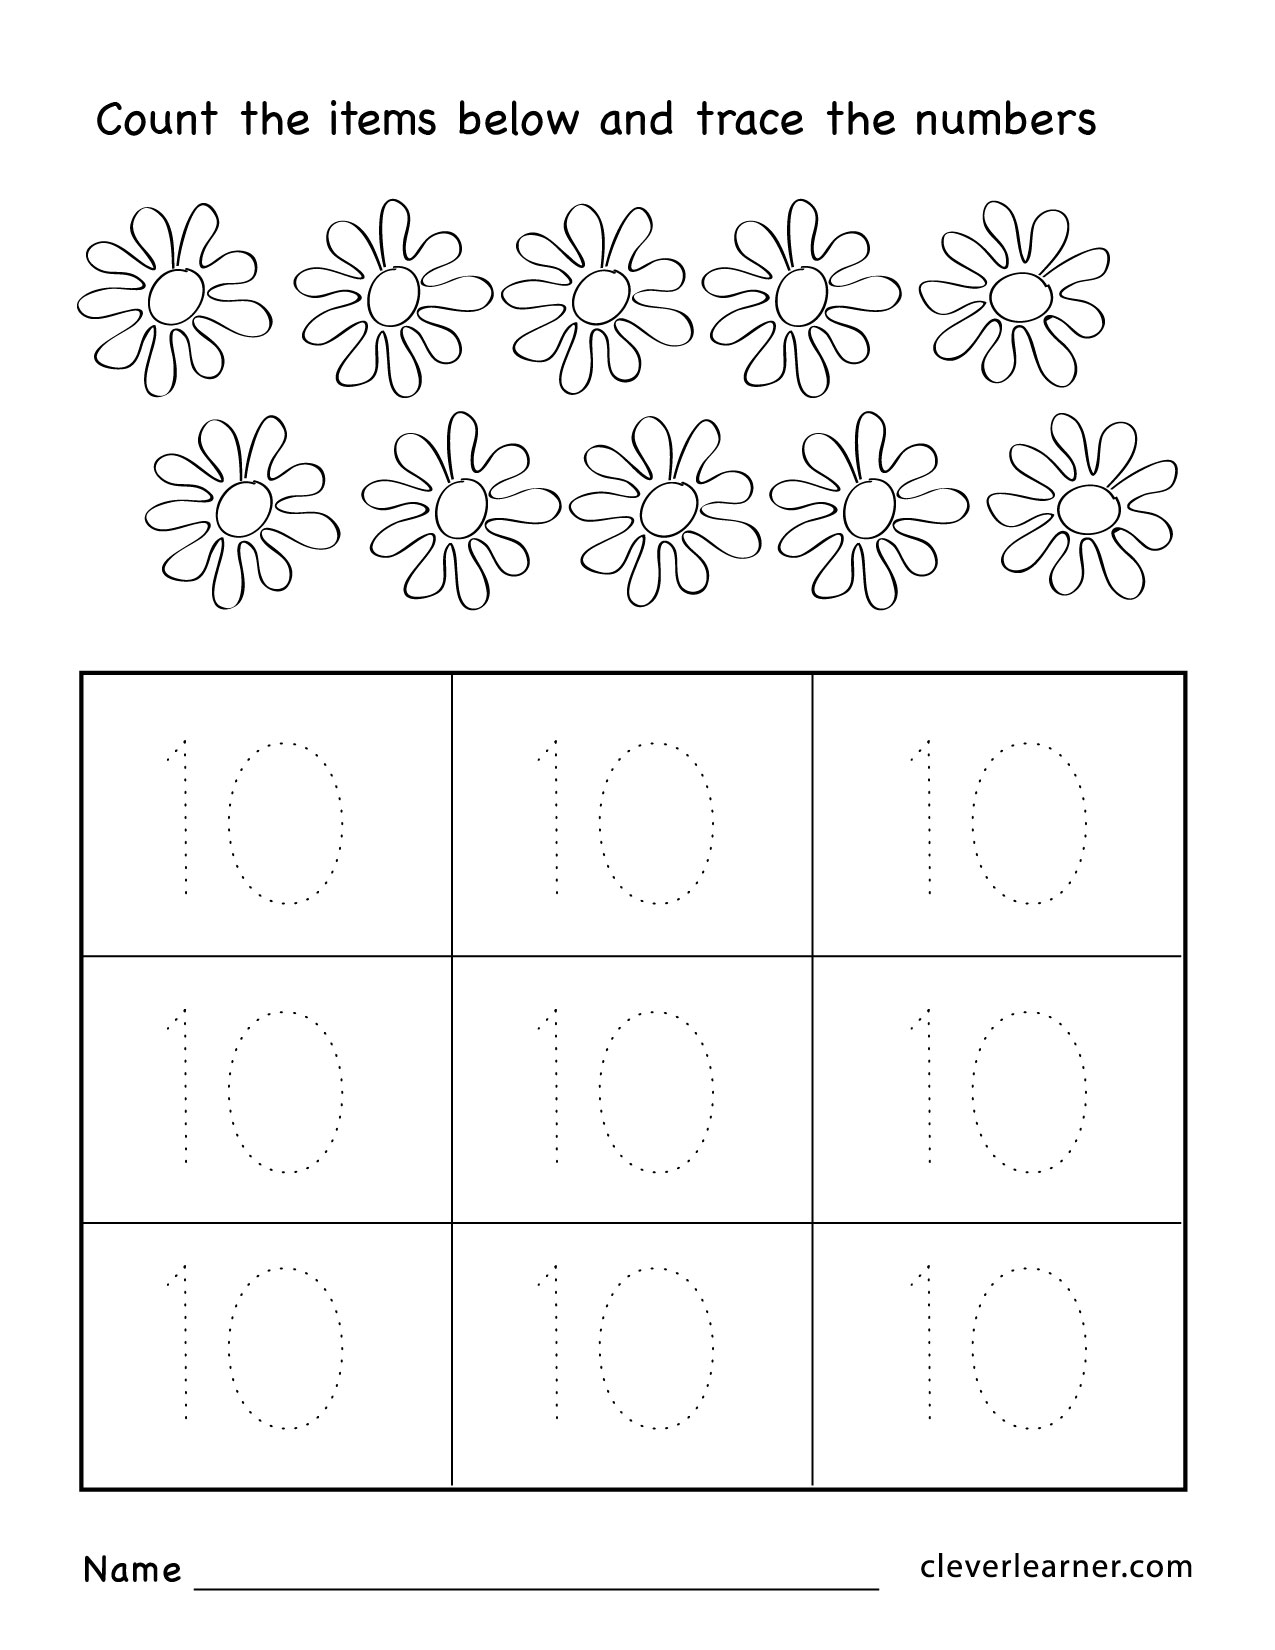 Number ten writing, counting and identification printable worksheets